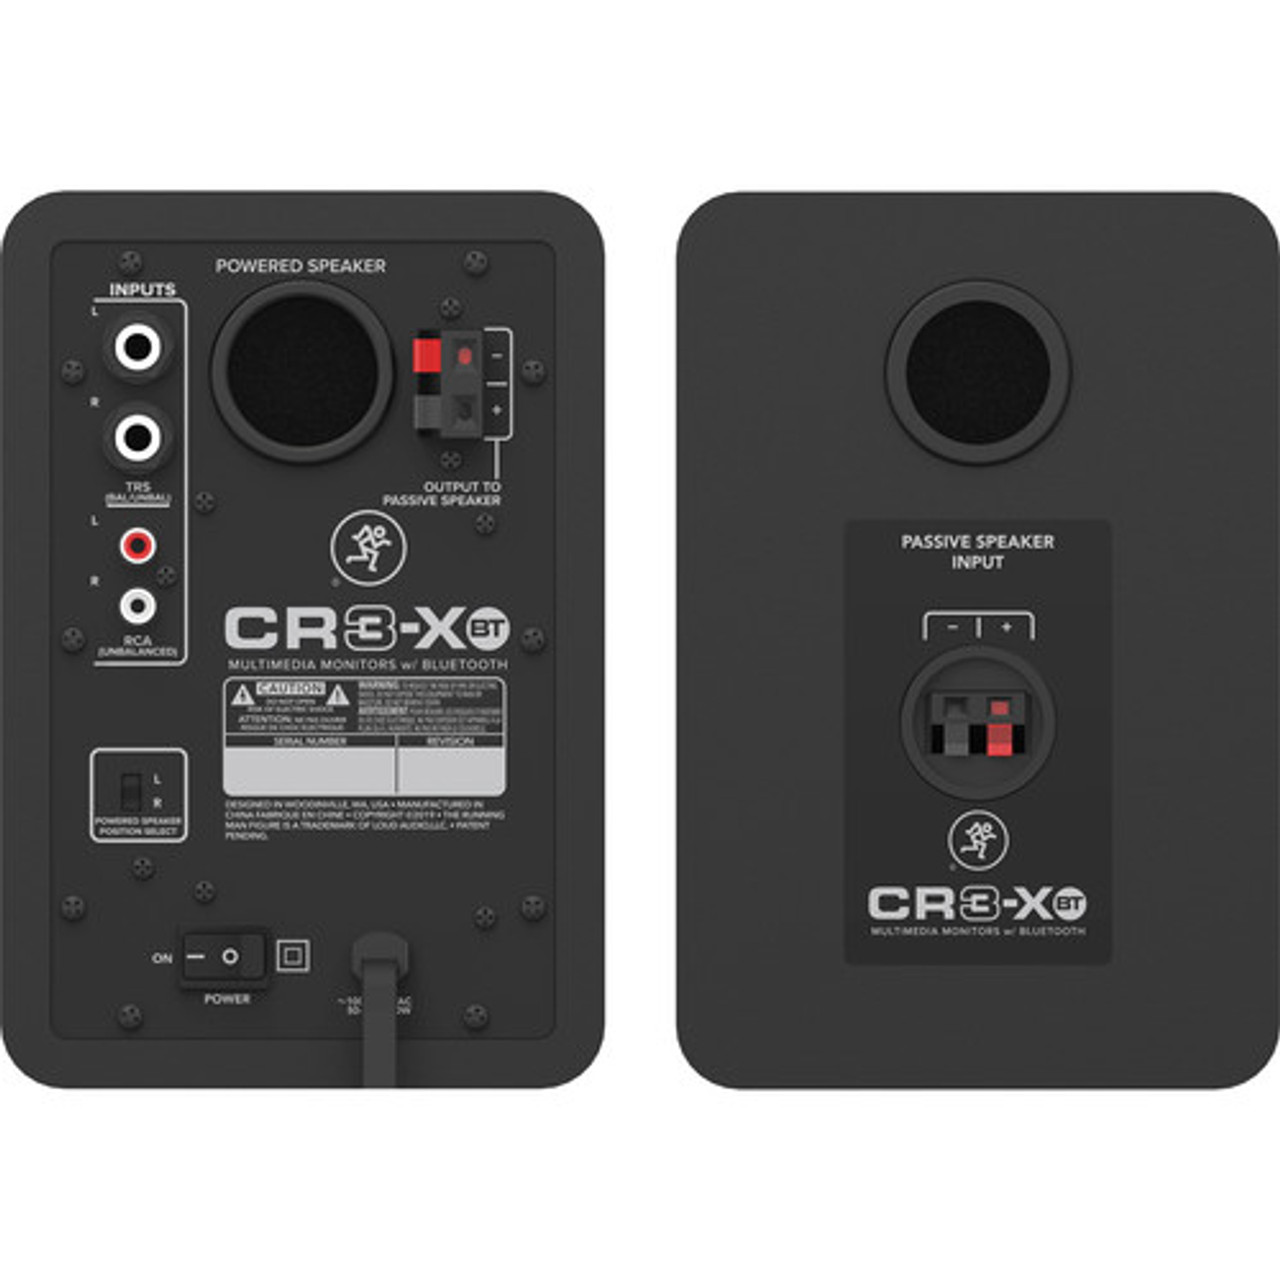 Mackie CR3-XBT Creative Reference Series 3" Multimedia Monitors with Bluetooth (Pair, Green) (CR3-XBT)